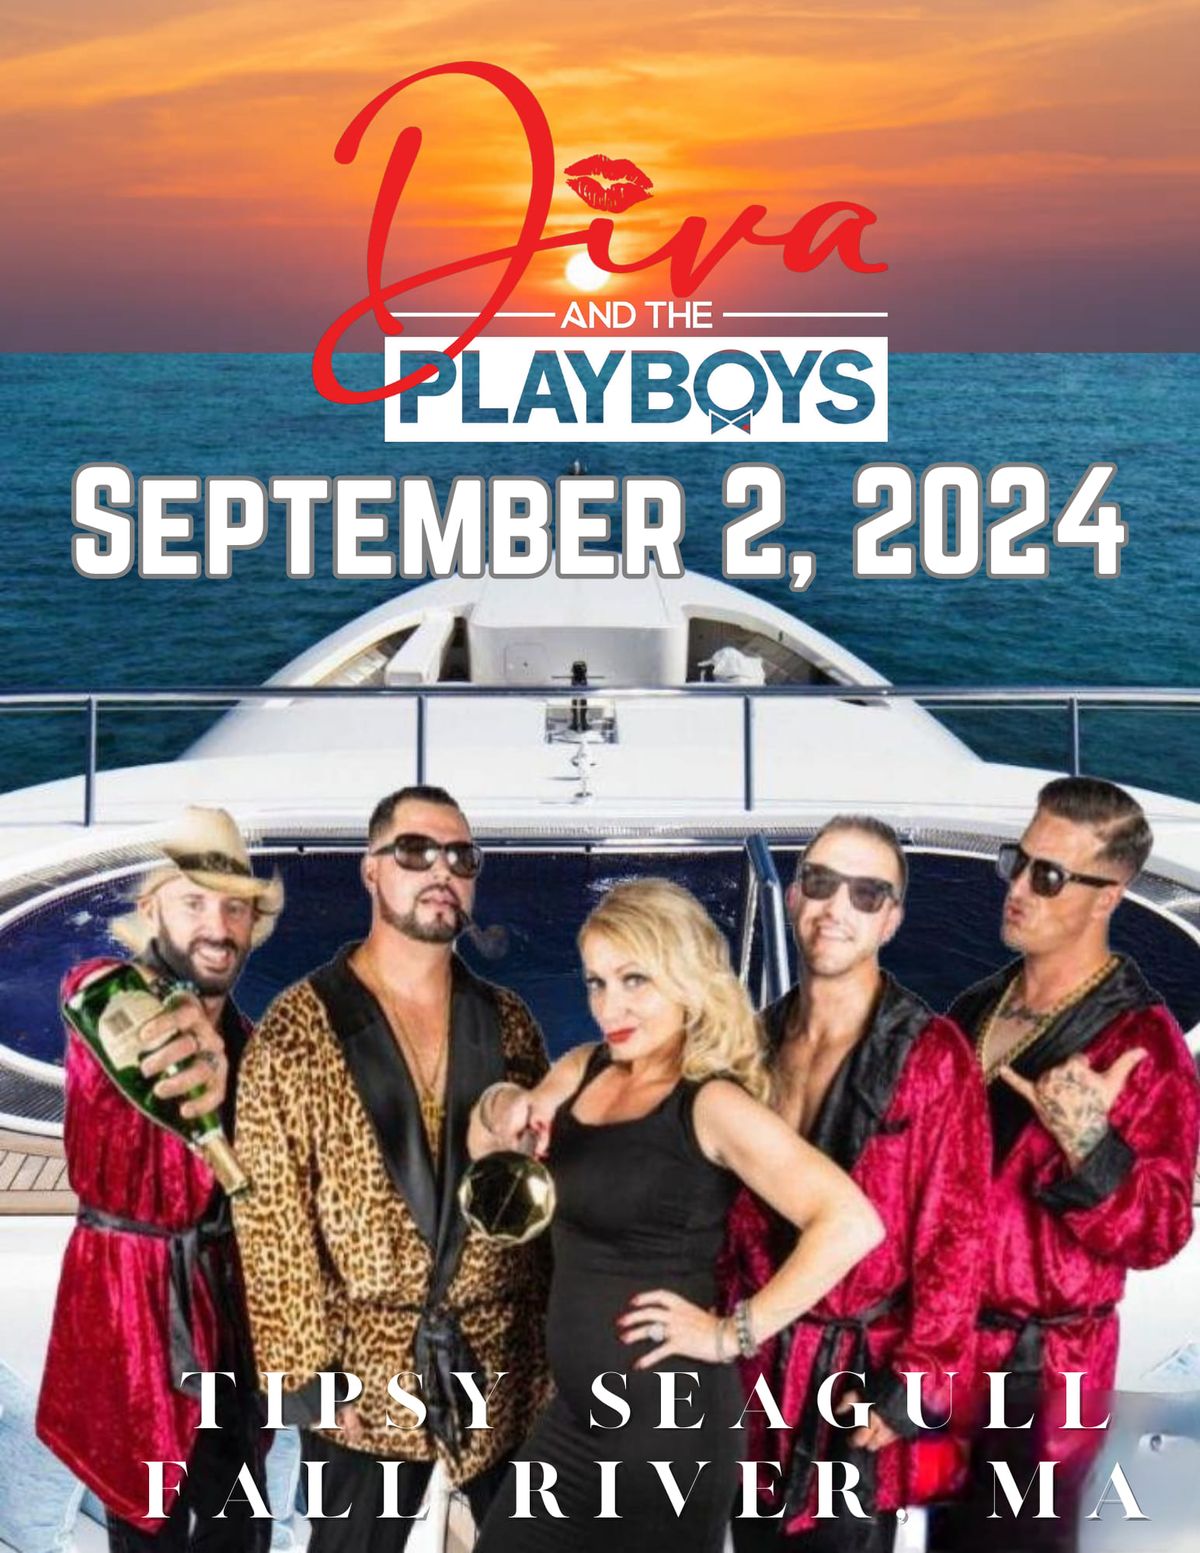 Diva and Playboys at Tipsy Seagull Labor Day 9\/2\/24!